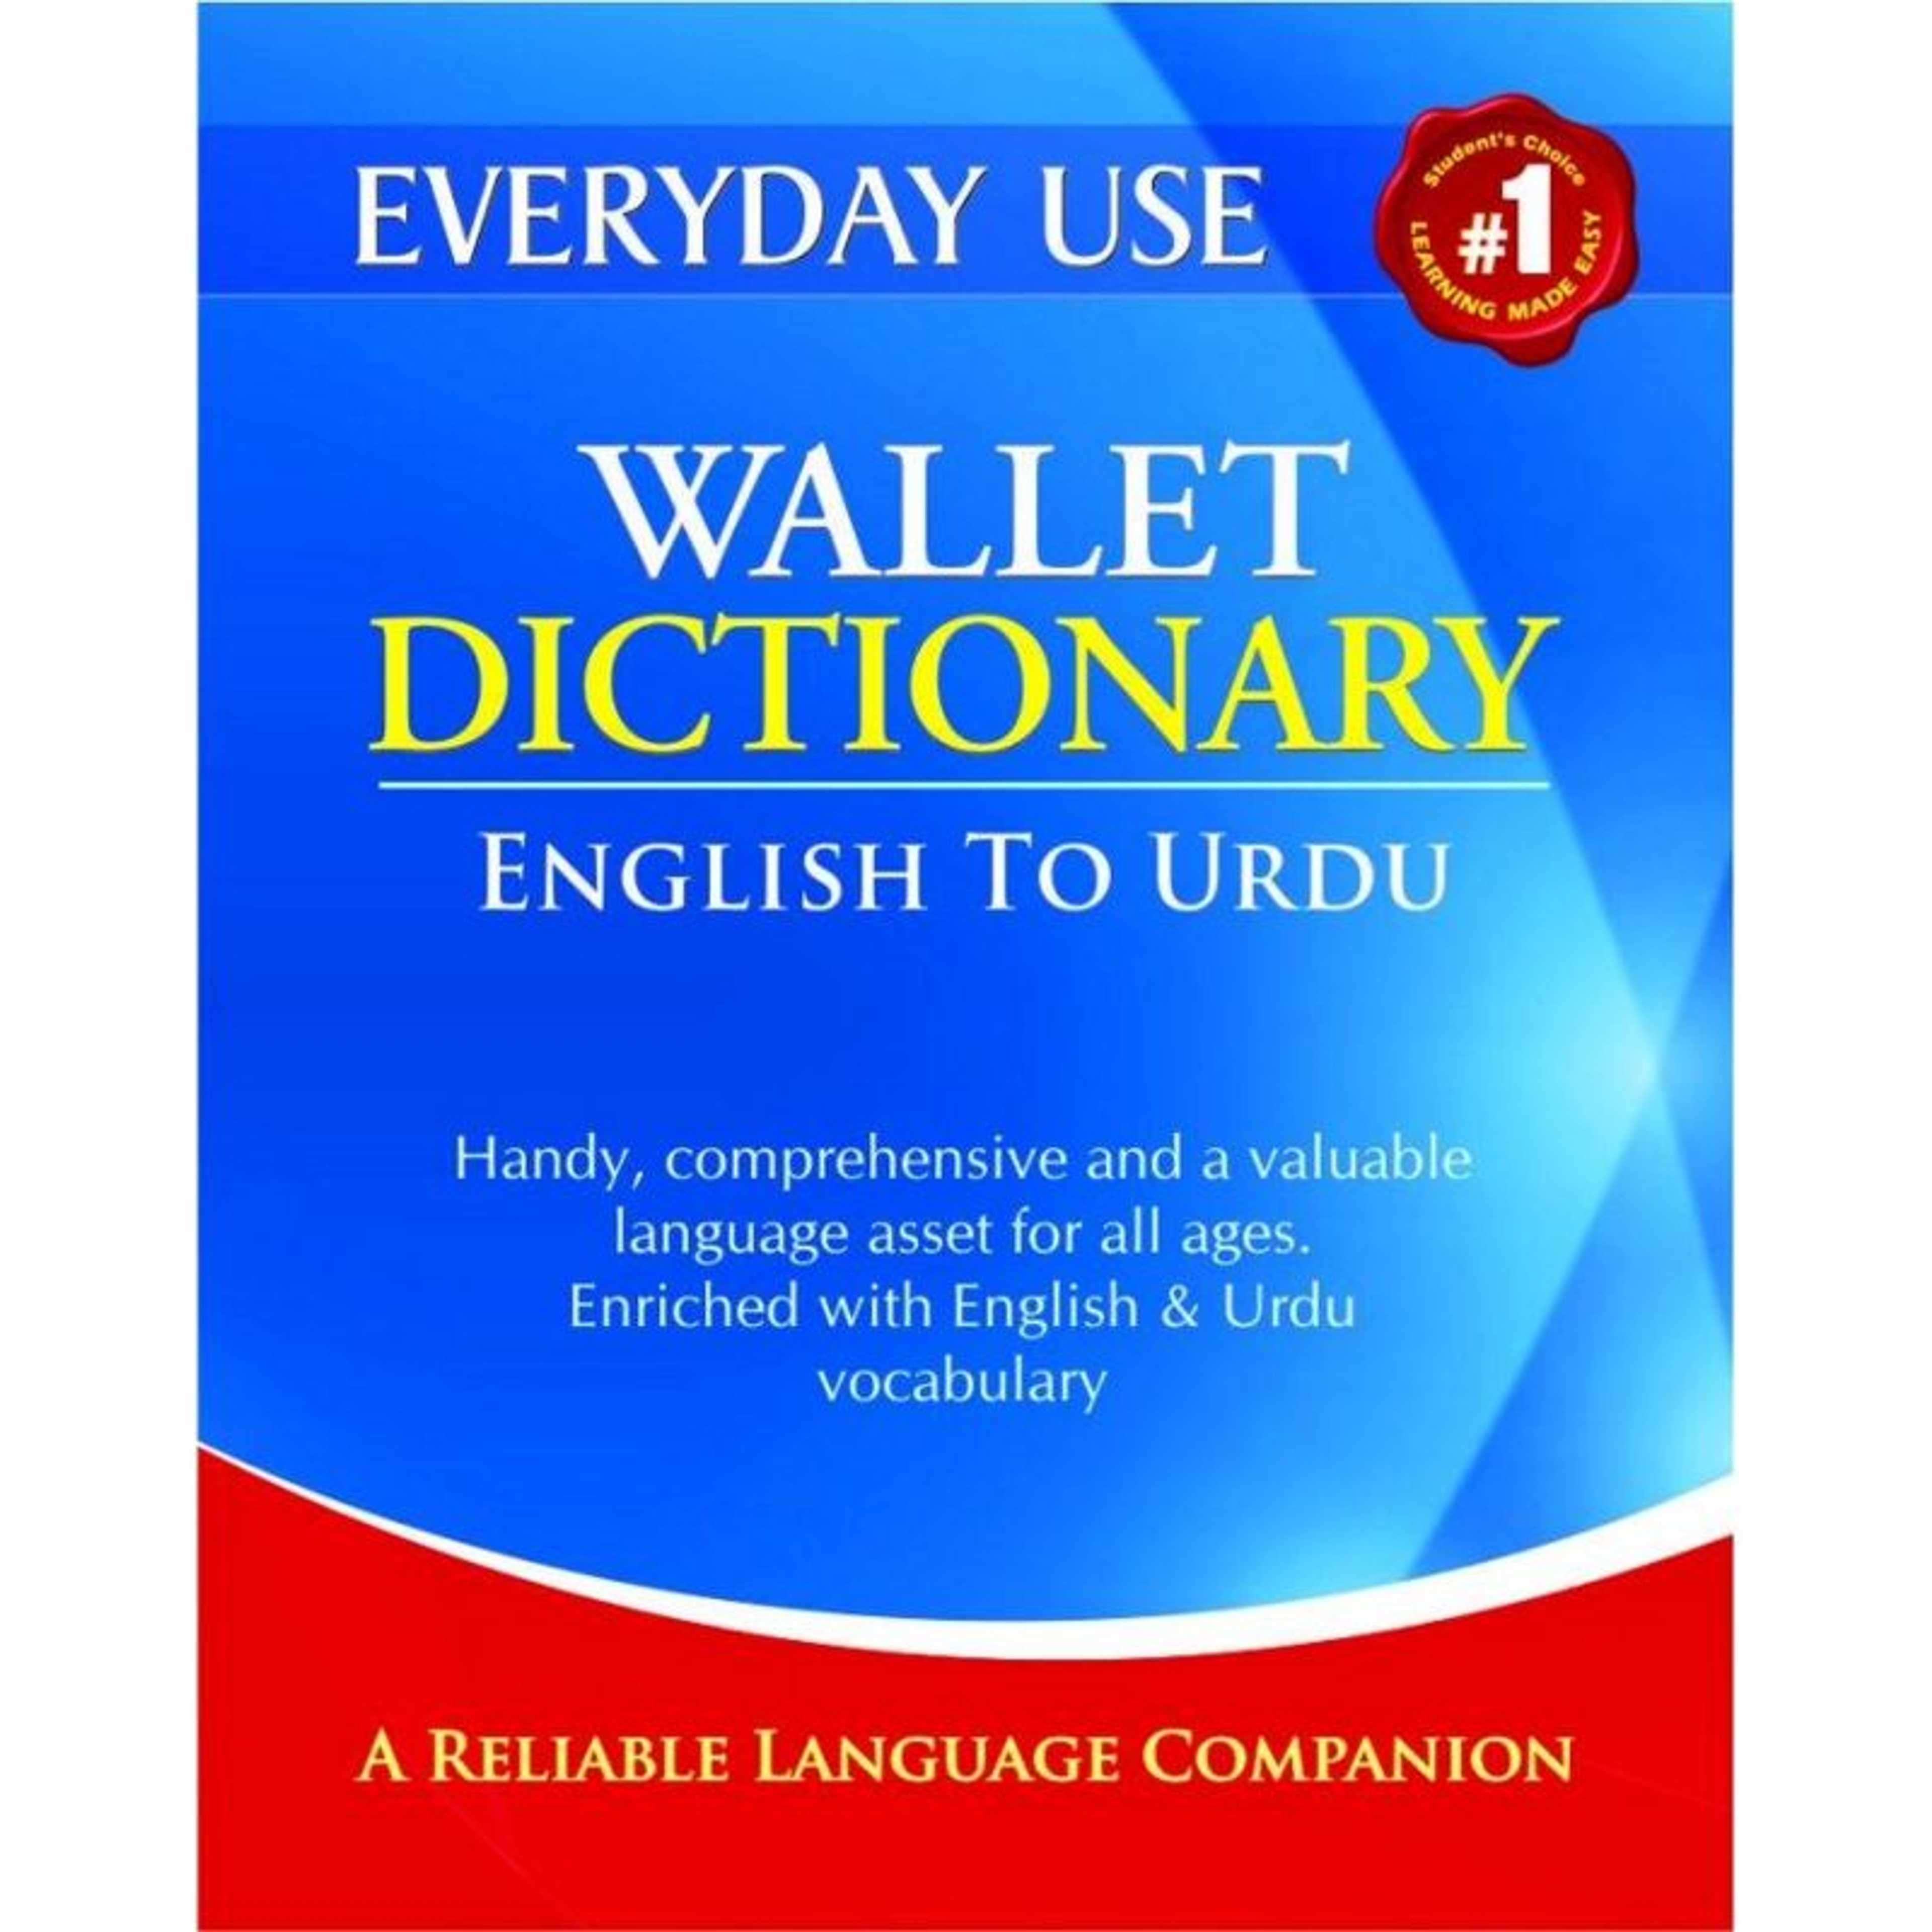 Wallet Dictionary (English to Urdu)